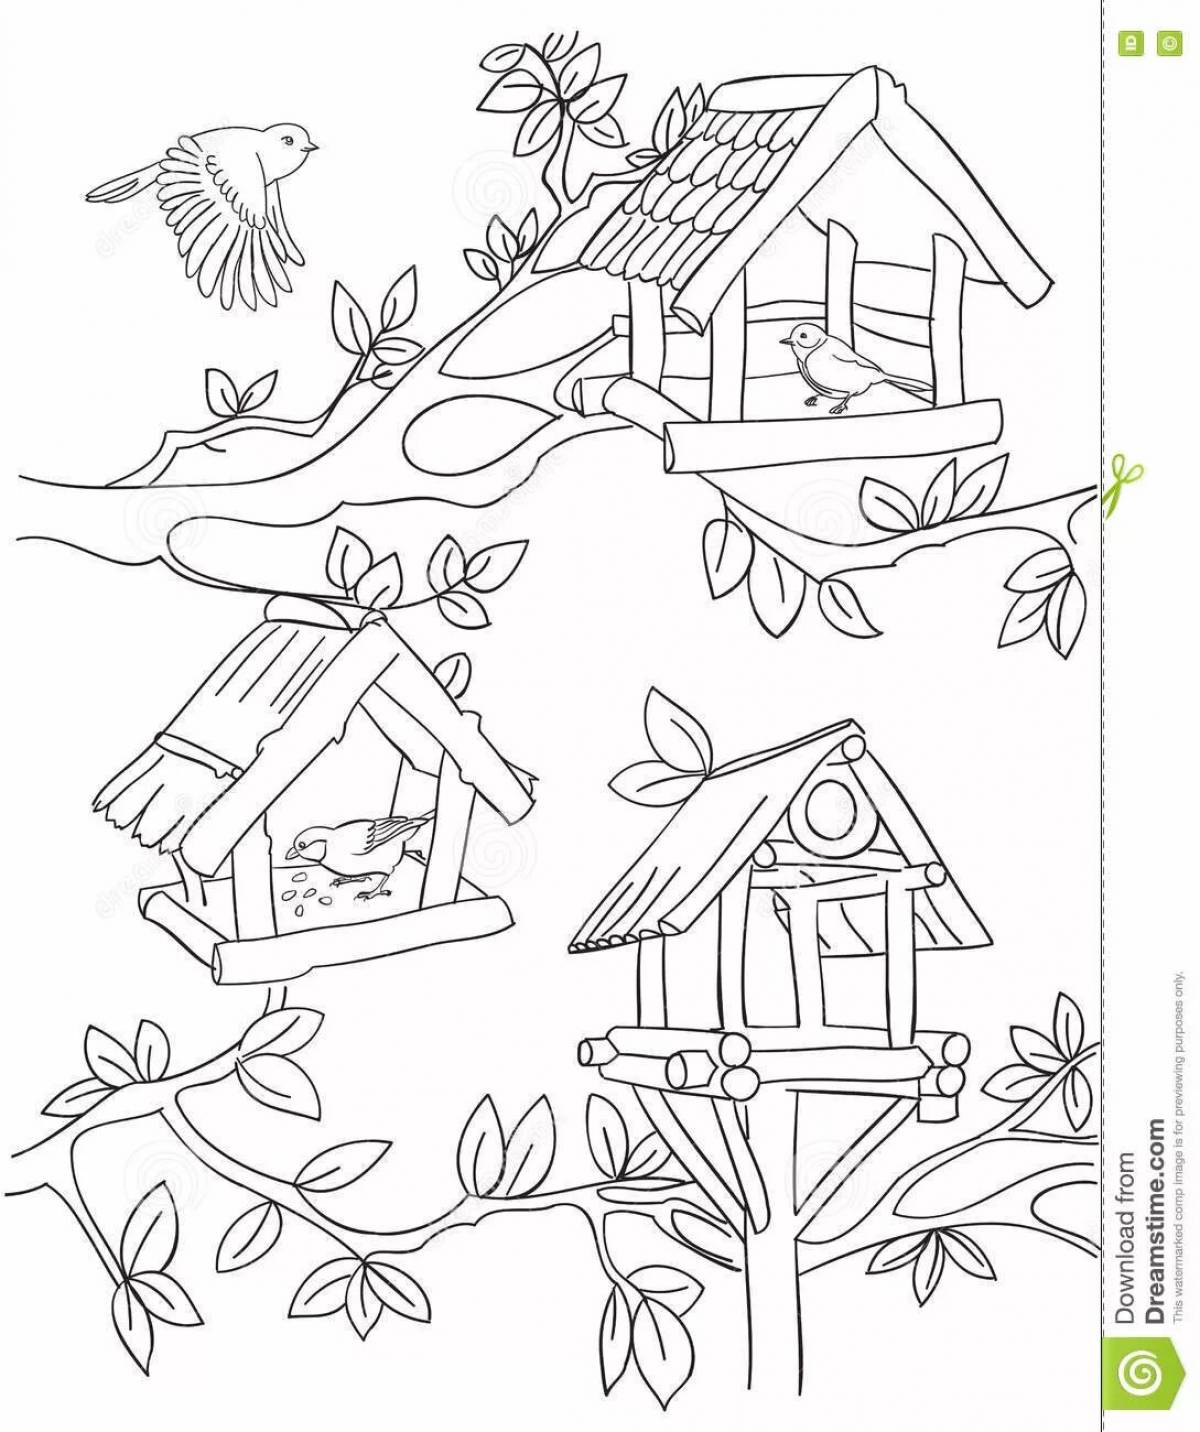 Fantastic bird feeder coloring book for 4-5 year olds